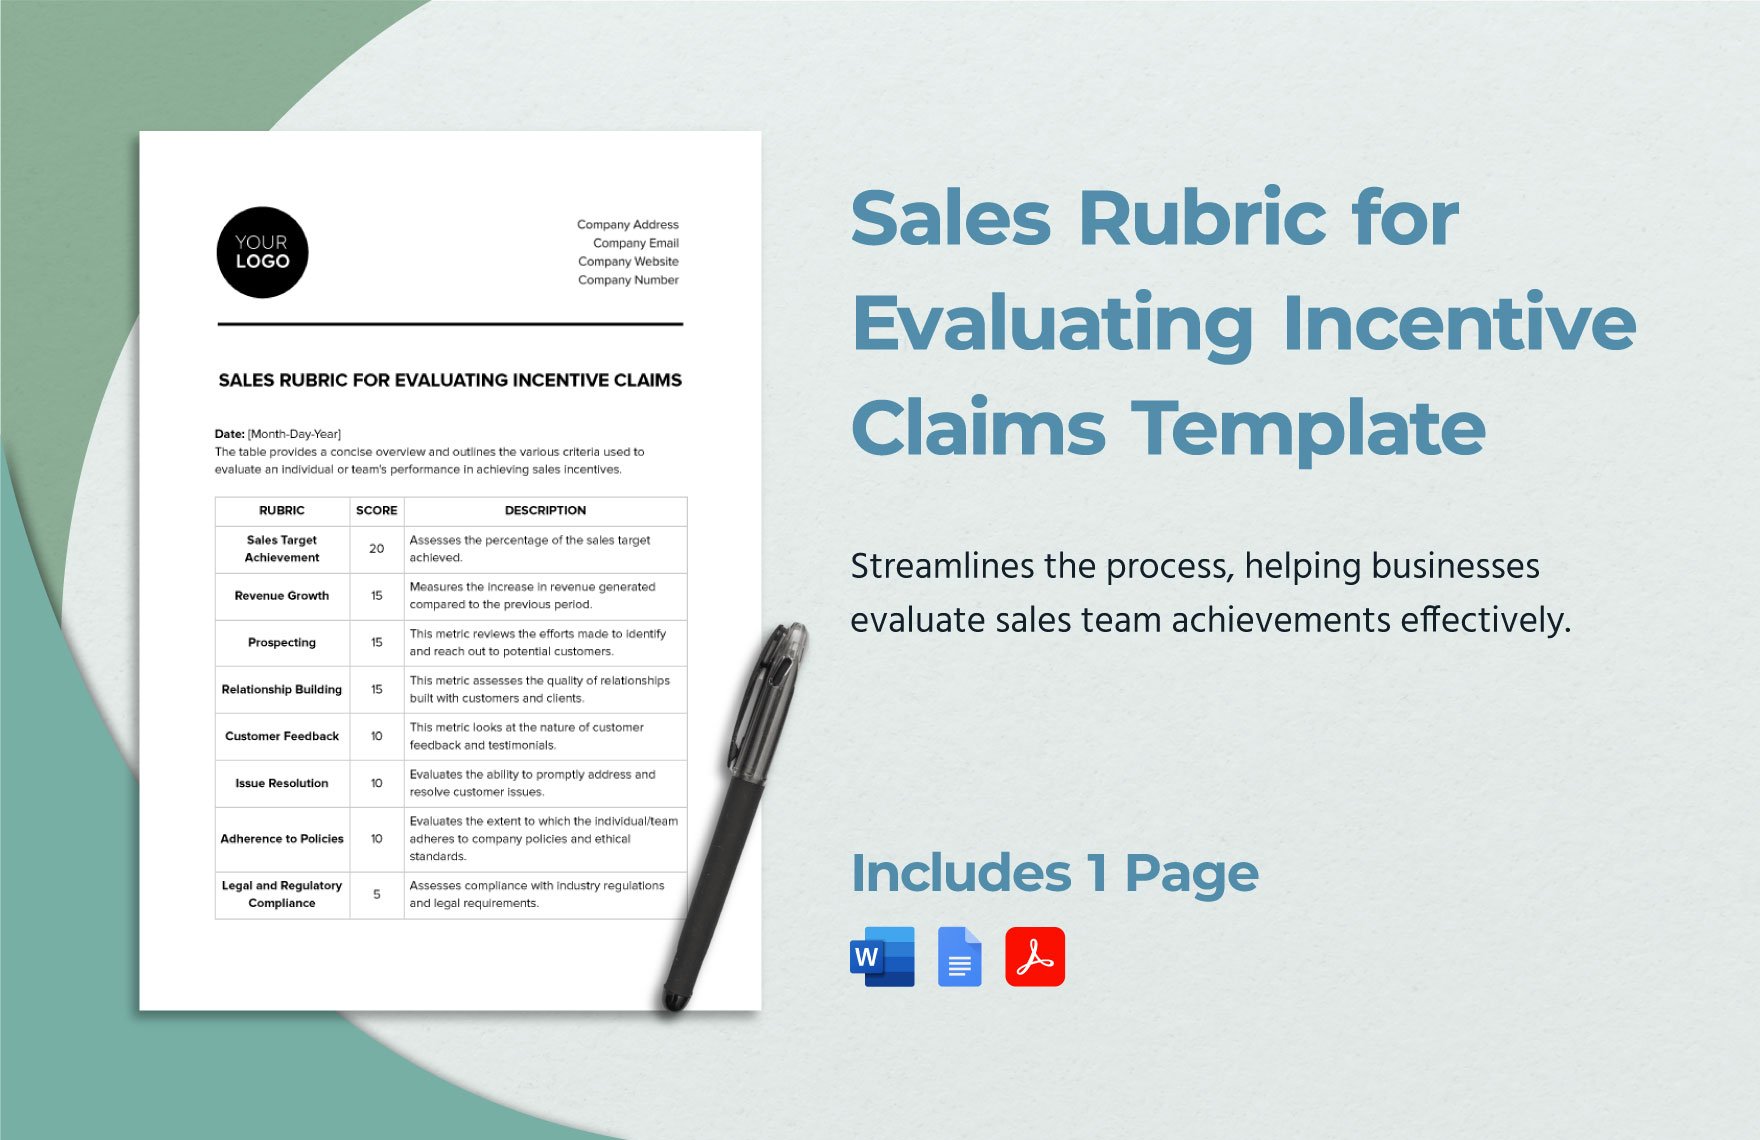 Sales Rubric for Evaluating Incentive Claims Template